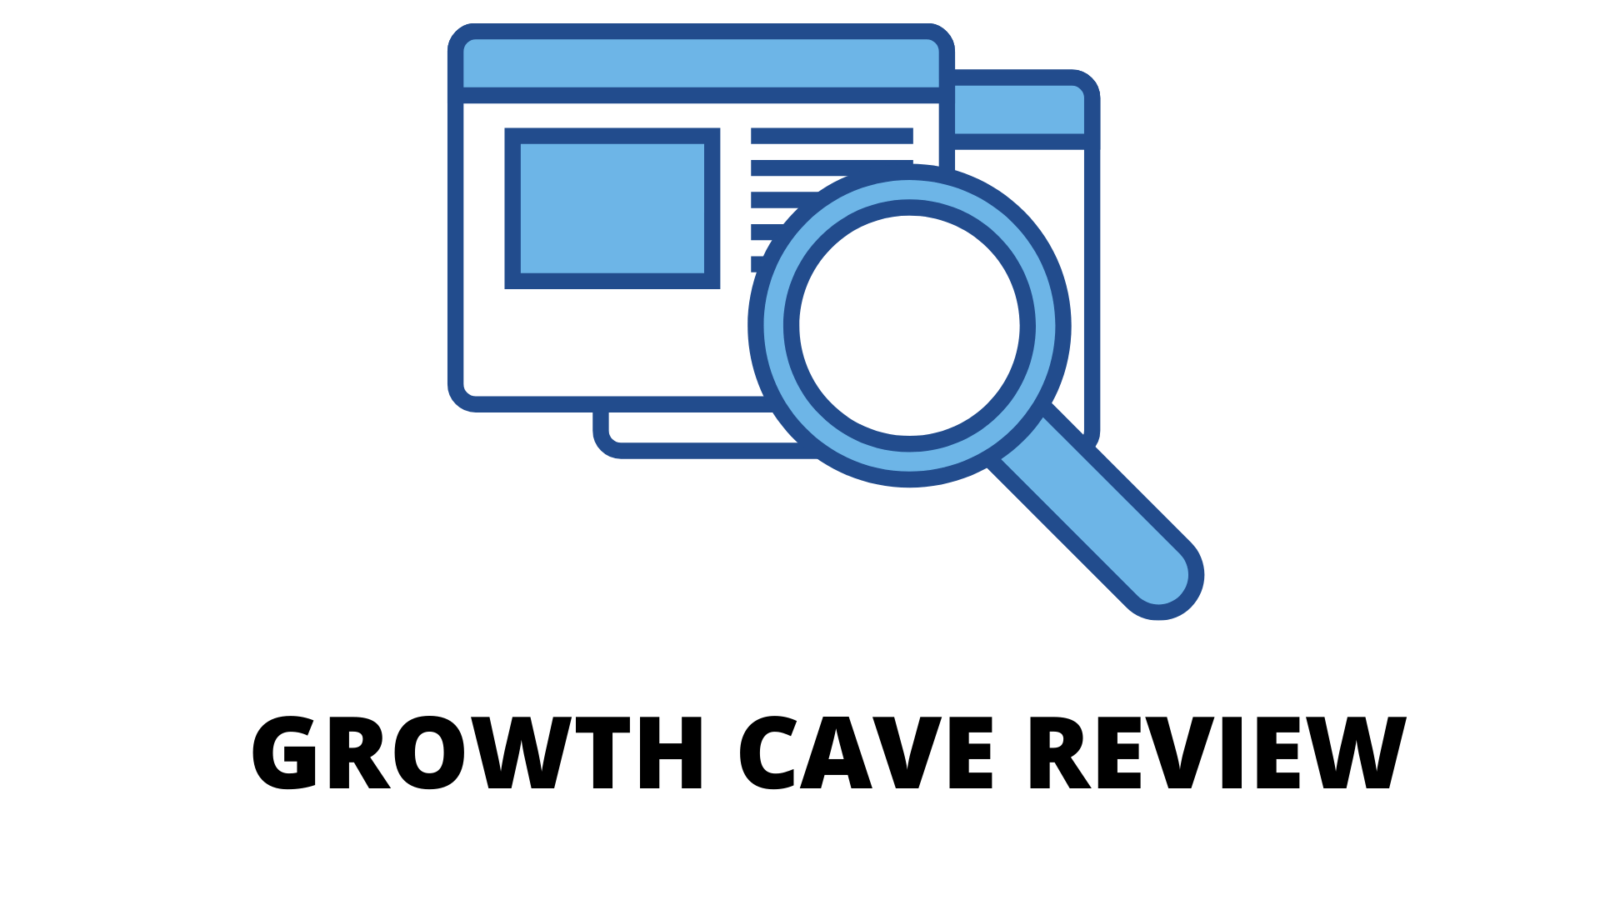 Growth Cave Reviews